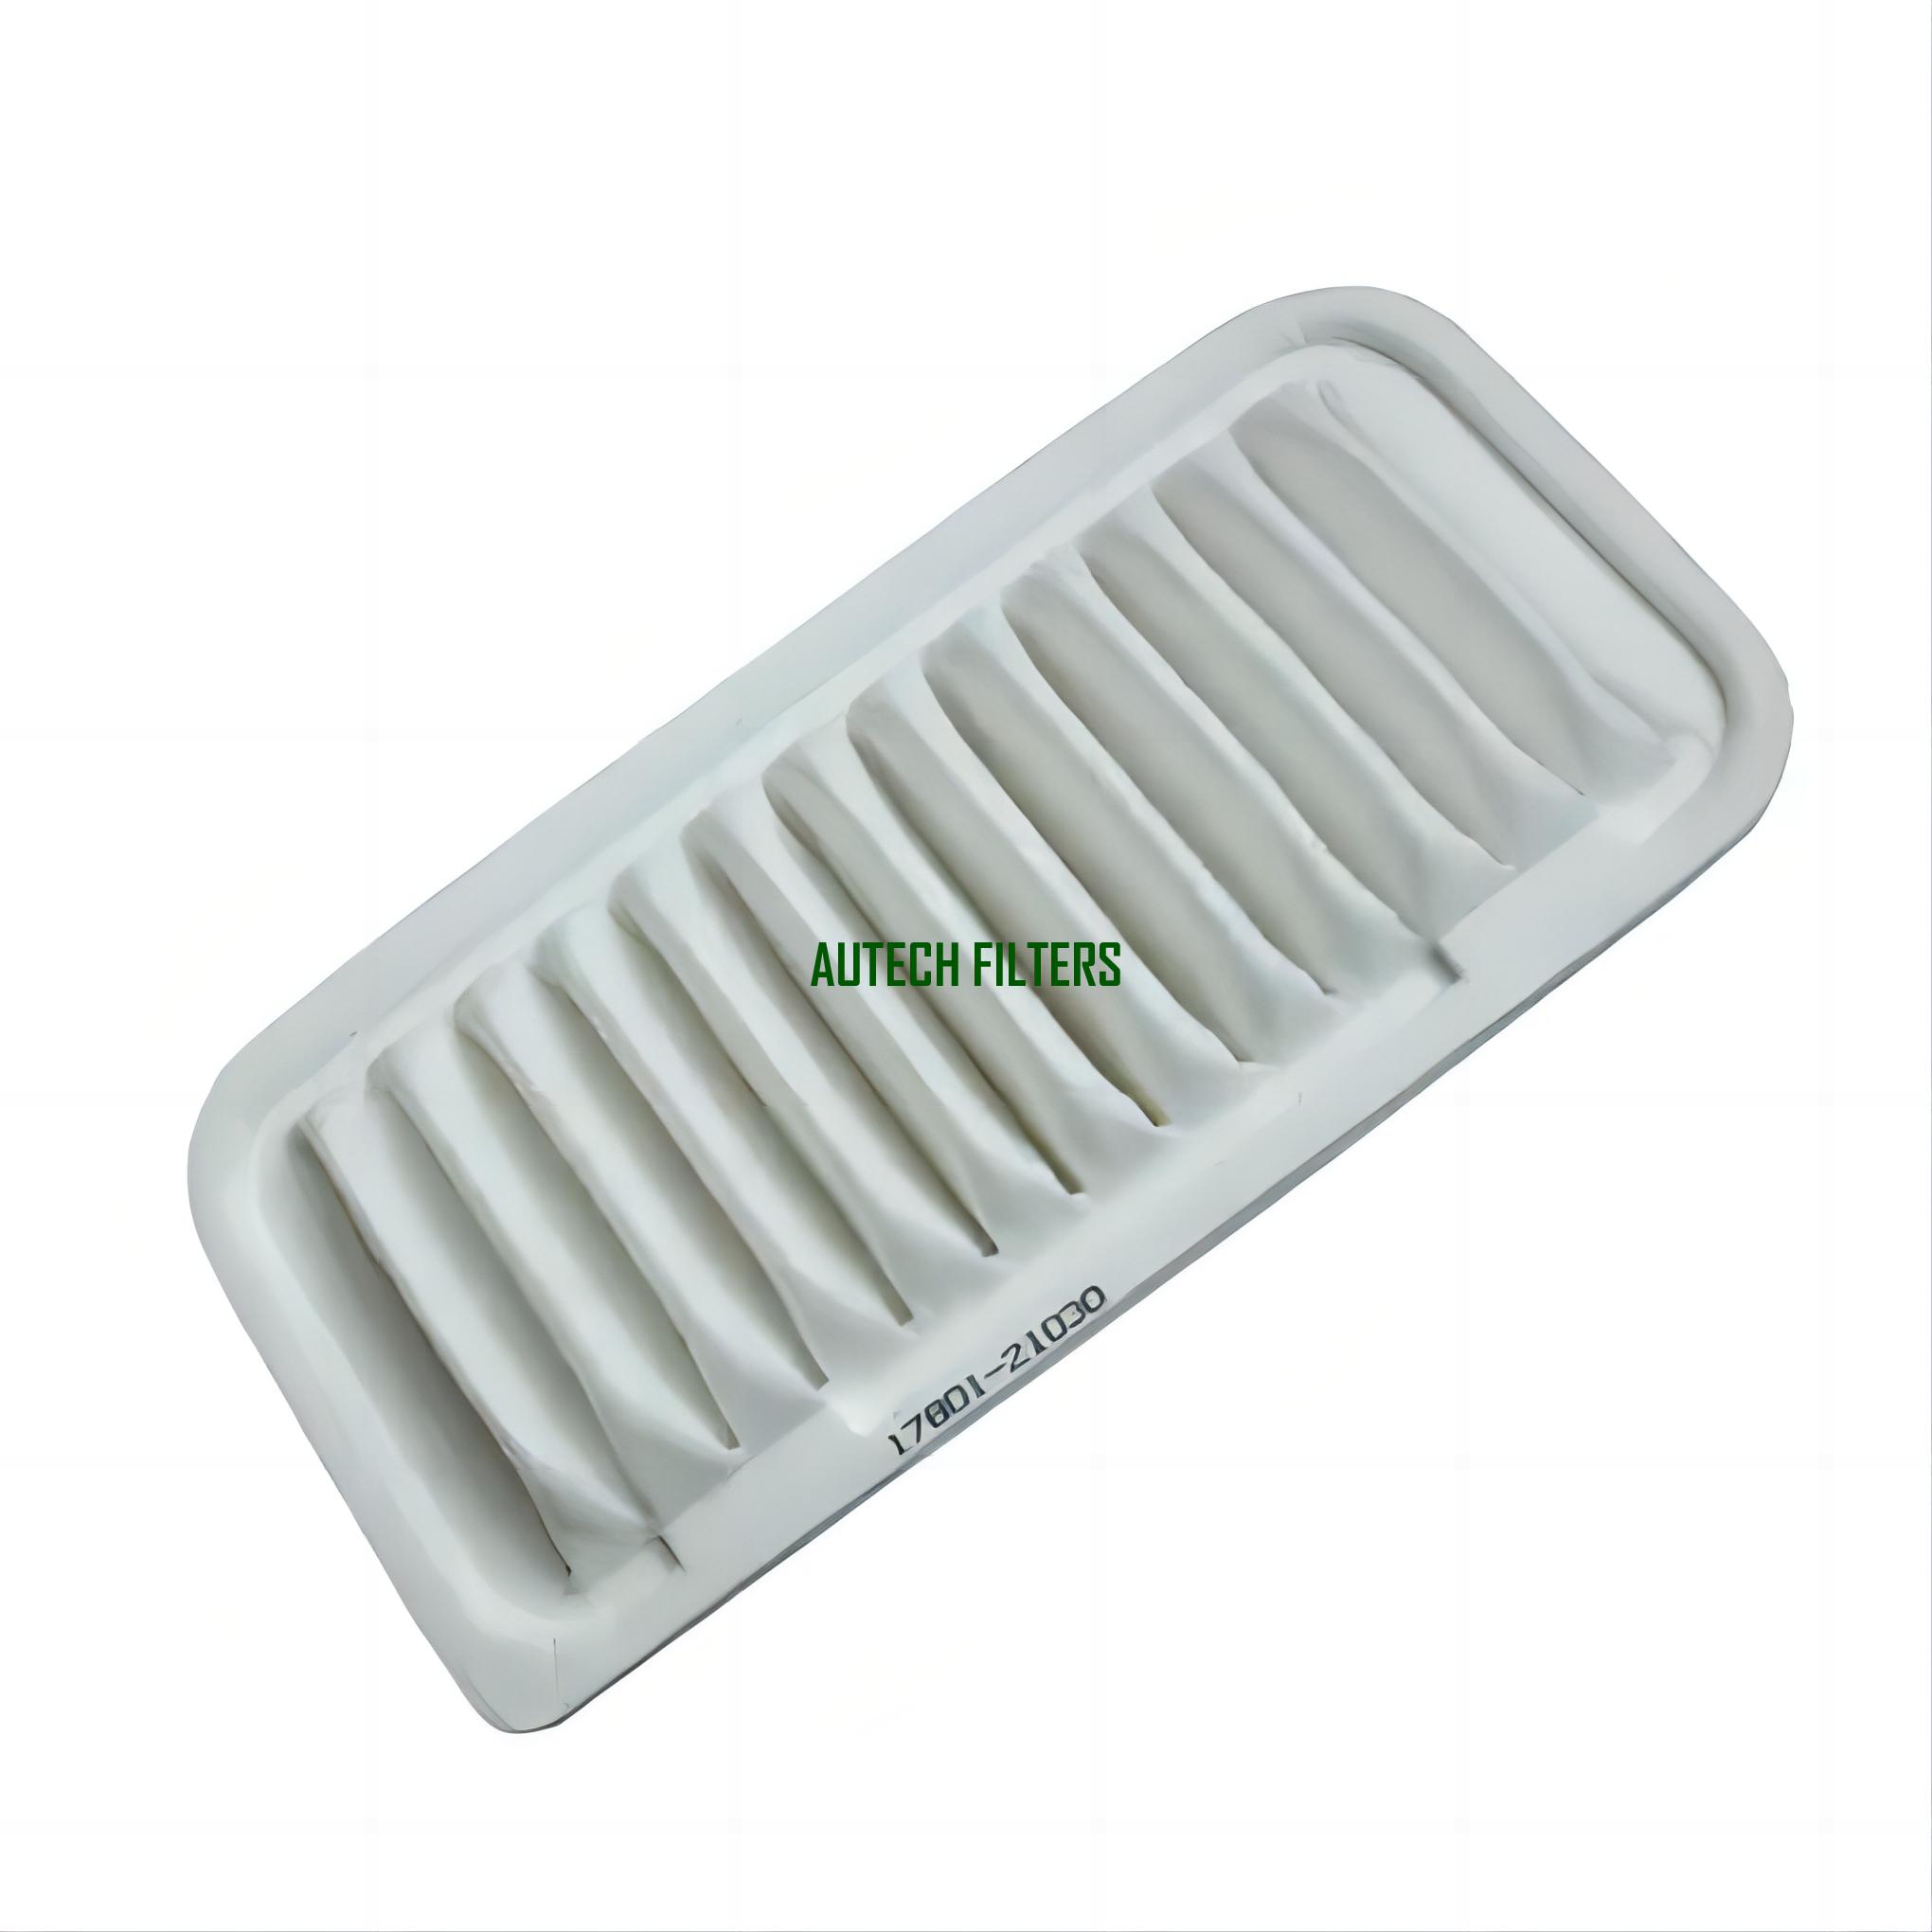 17801-21030 Air Filter for TOYOTA YARIS 1.5 , SPORT 1.3, URBAN CRUSIER 1.3/ GREAT WALL